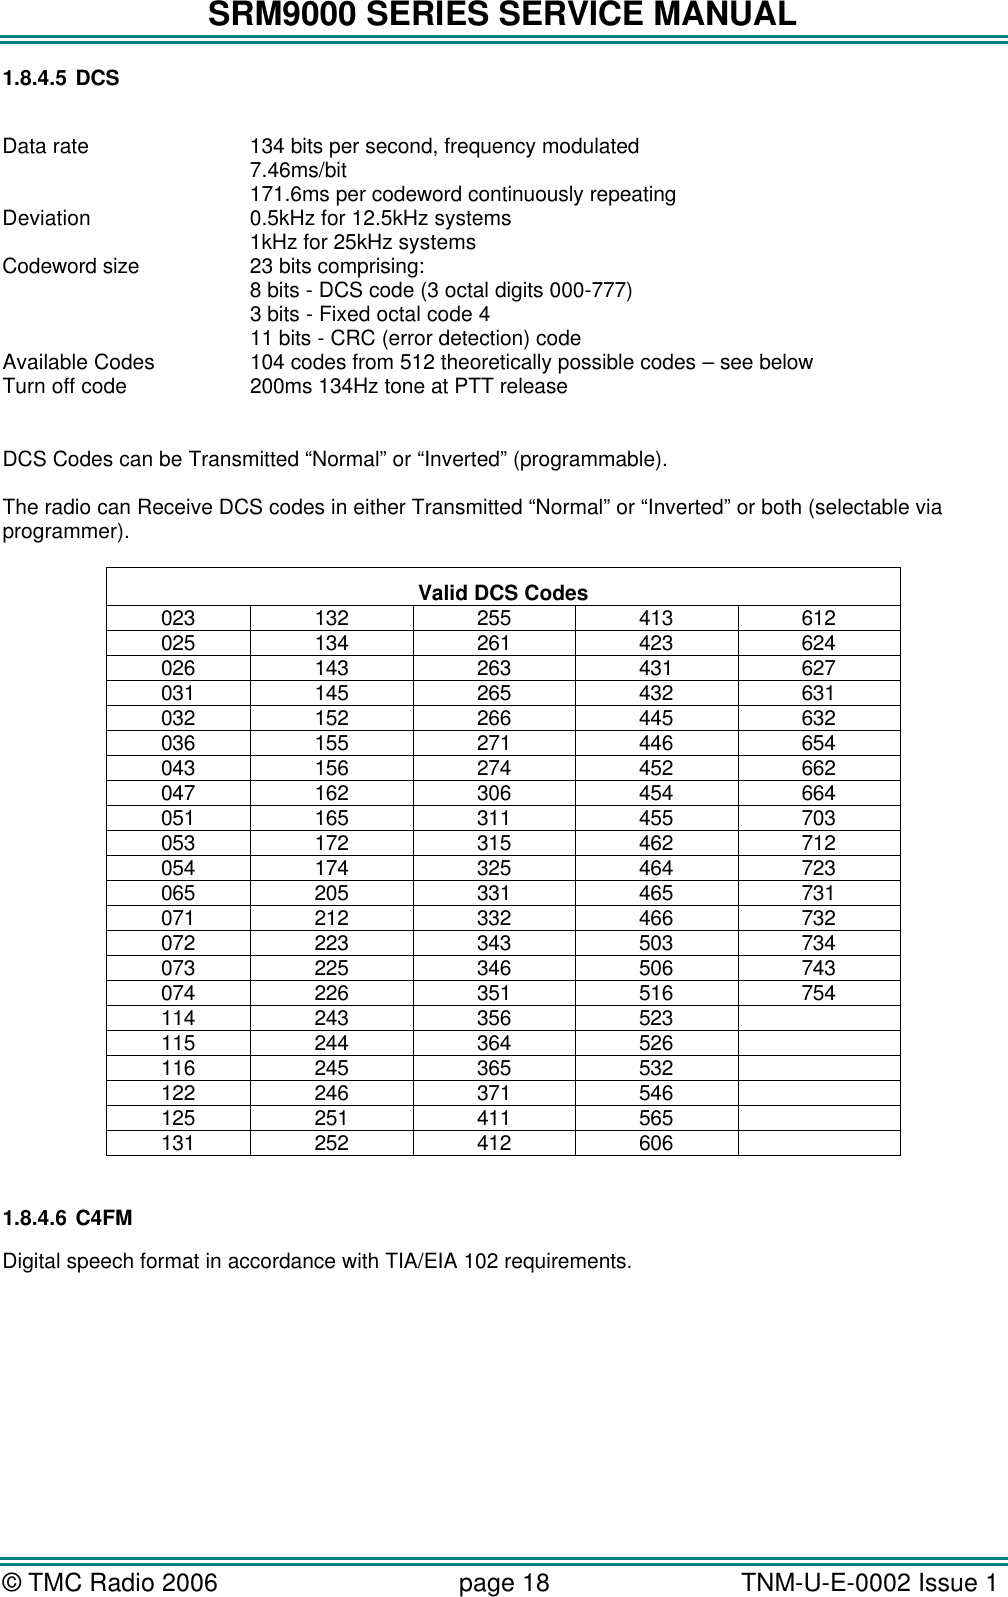 SRM9000 SERIES SERVICE MANUAL © TMC Radio 2006 page 18   TNM-U-E-0002 Issue 1  1.8.4.5 DCS  Data rate 134 bits per second, frequency modulated 7.46ms/bit 171.6ms per codeword continuously repeating Deviation 0.5kHz for 12.5kHz systems 1kHz for 25kHz systems Codeword size 23 bits comprising: 8 bits - DCS code (3 octal digits 000-777) 3 bits - Fixed octal code 4 11 bits - CRC (error detection) code Available Codes 104 codes from 512 theoretically possible codes – see below Turn off code 200ms 134Hz tone at PTT release  DCS Codes can be Transmitted “Normal” or “Inverted” (programmable).  The radio can Receive DCS codes in either Transmitted “Normal” or “Inverted” or both (selectable via programmer).  Valid DCS Codes 023 132 255 413 612 025 134 261 423 624 026 143 263 431 627 031 145 265 432 631 032 152 266 445 632 036 155 271 446 654 043 156 274 452 662 047 162 306 454 664 051 165 311 455 703 053 172 315 462 712 054 174 325 464 723 065 205 331 465 731 071 212 332 466 732 072 223 343 503 734 073 225 346 506 743 074 226 351 516 754 114 243 356 523   115 244 364 526   116 245 365 532   122 246 371 546   125 251 411 565   131 252 412 606    1.8.4.6 C4FM Digital speech format in accordance with TIA/EIA 102 requirements.        